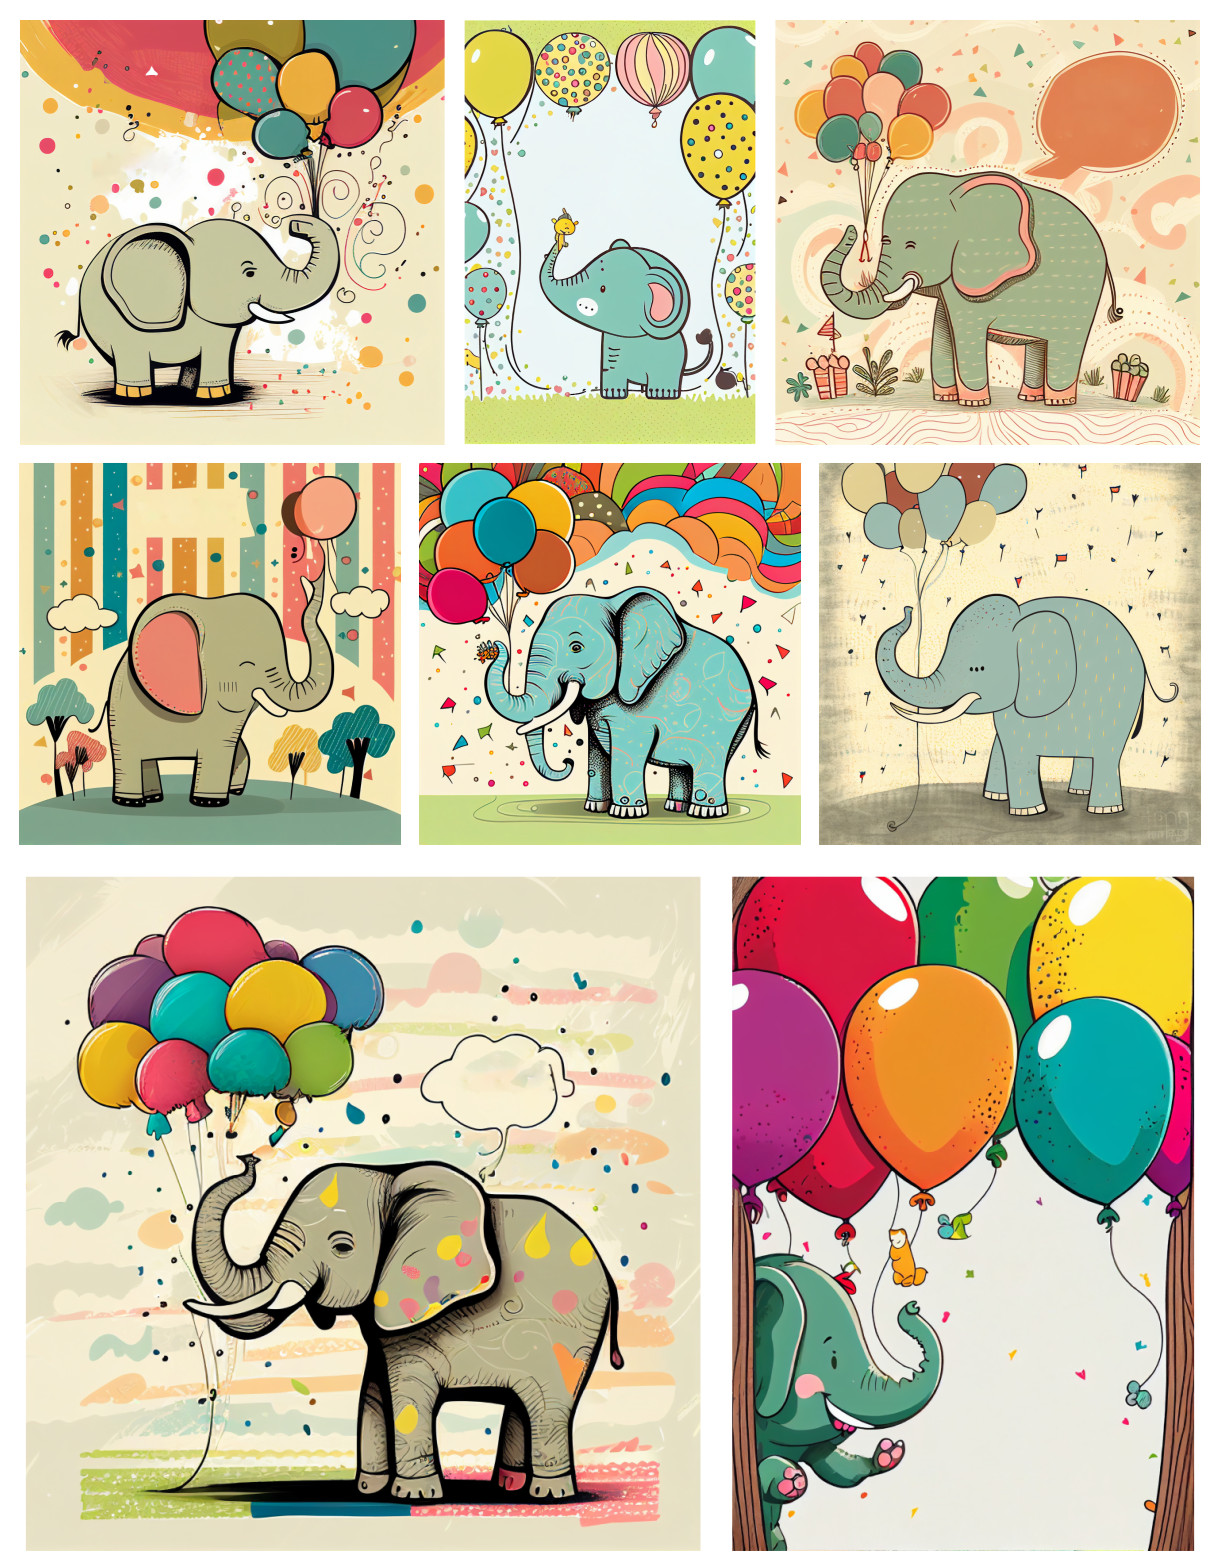 Spruce Up Your Celebration: Download 8 Free Elephant Birthday Drawing Backgrounds with Balloons